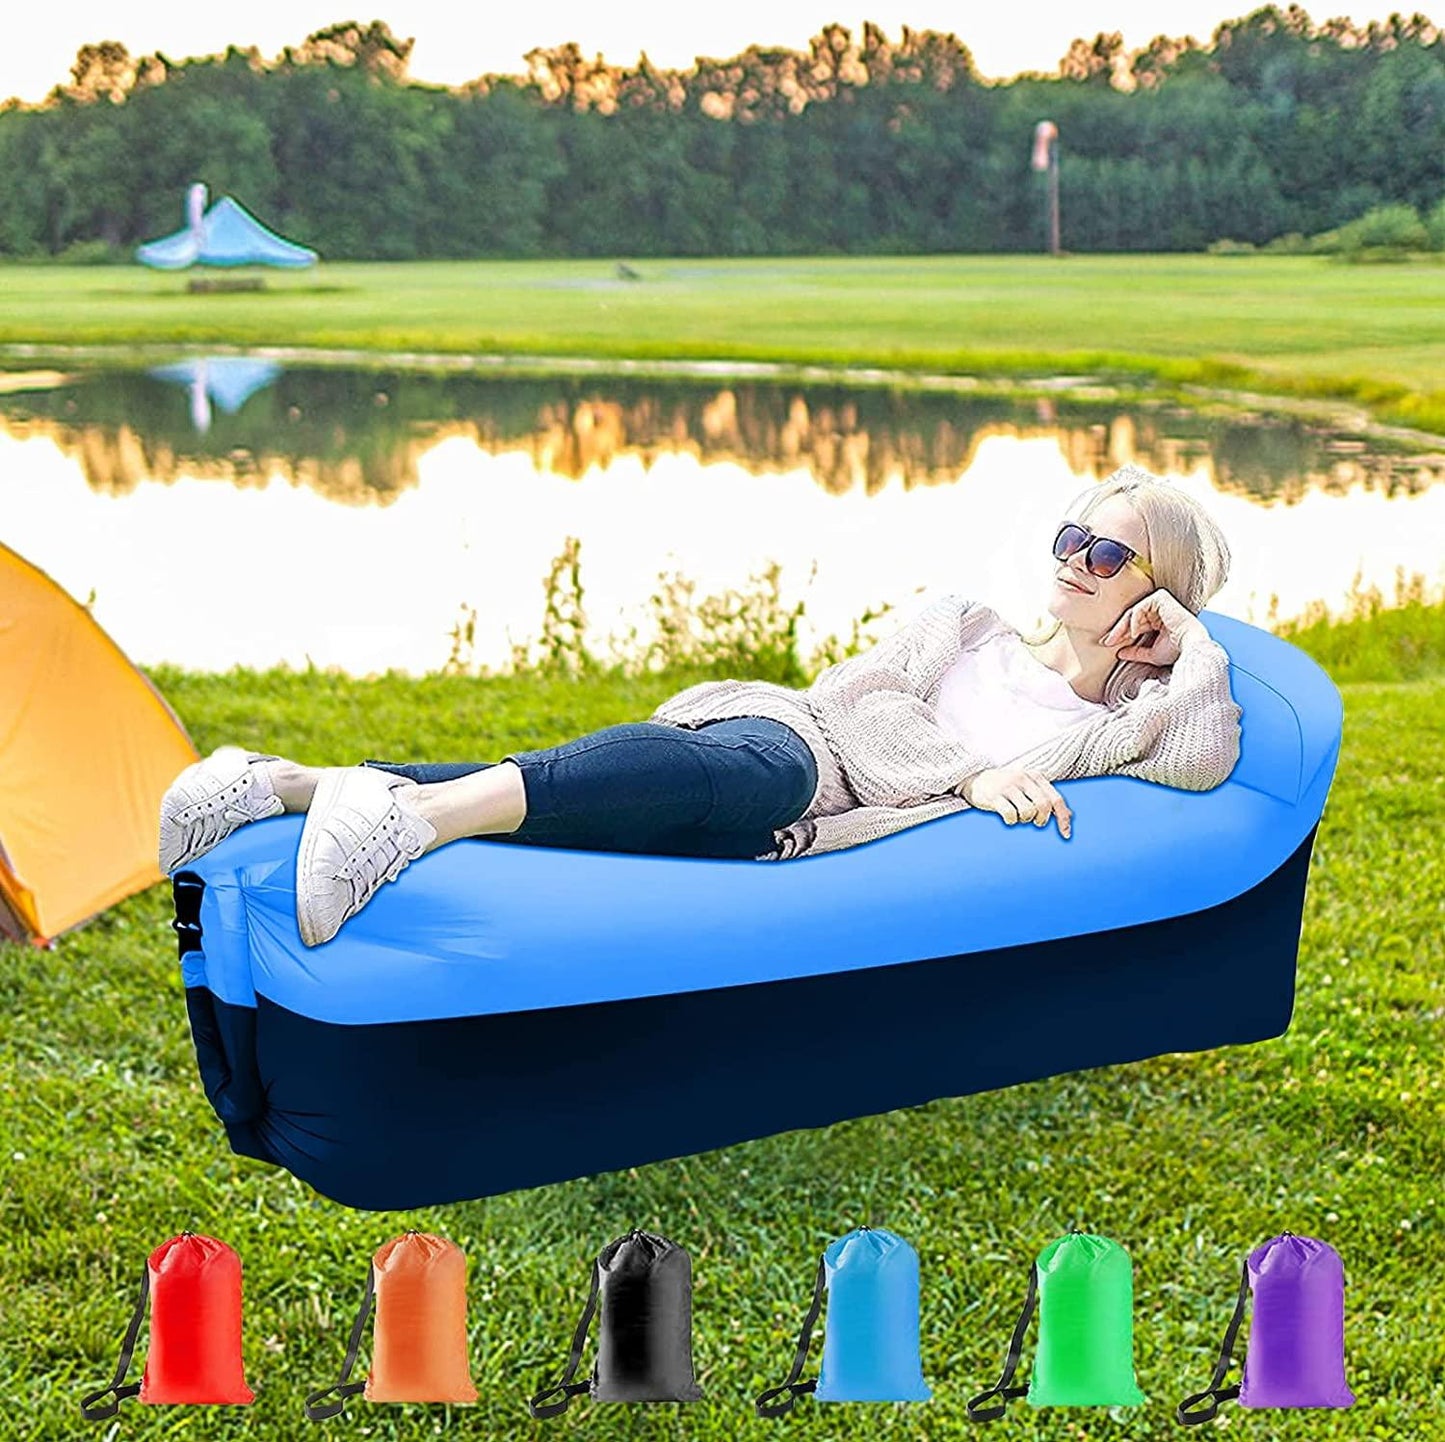 Relaxing on the go with the inflatable lounge hammock